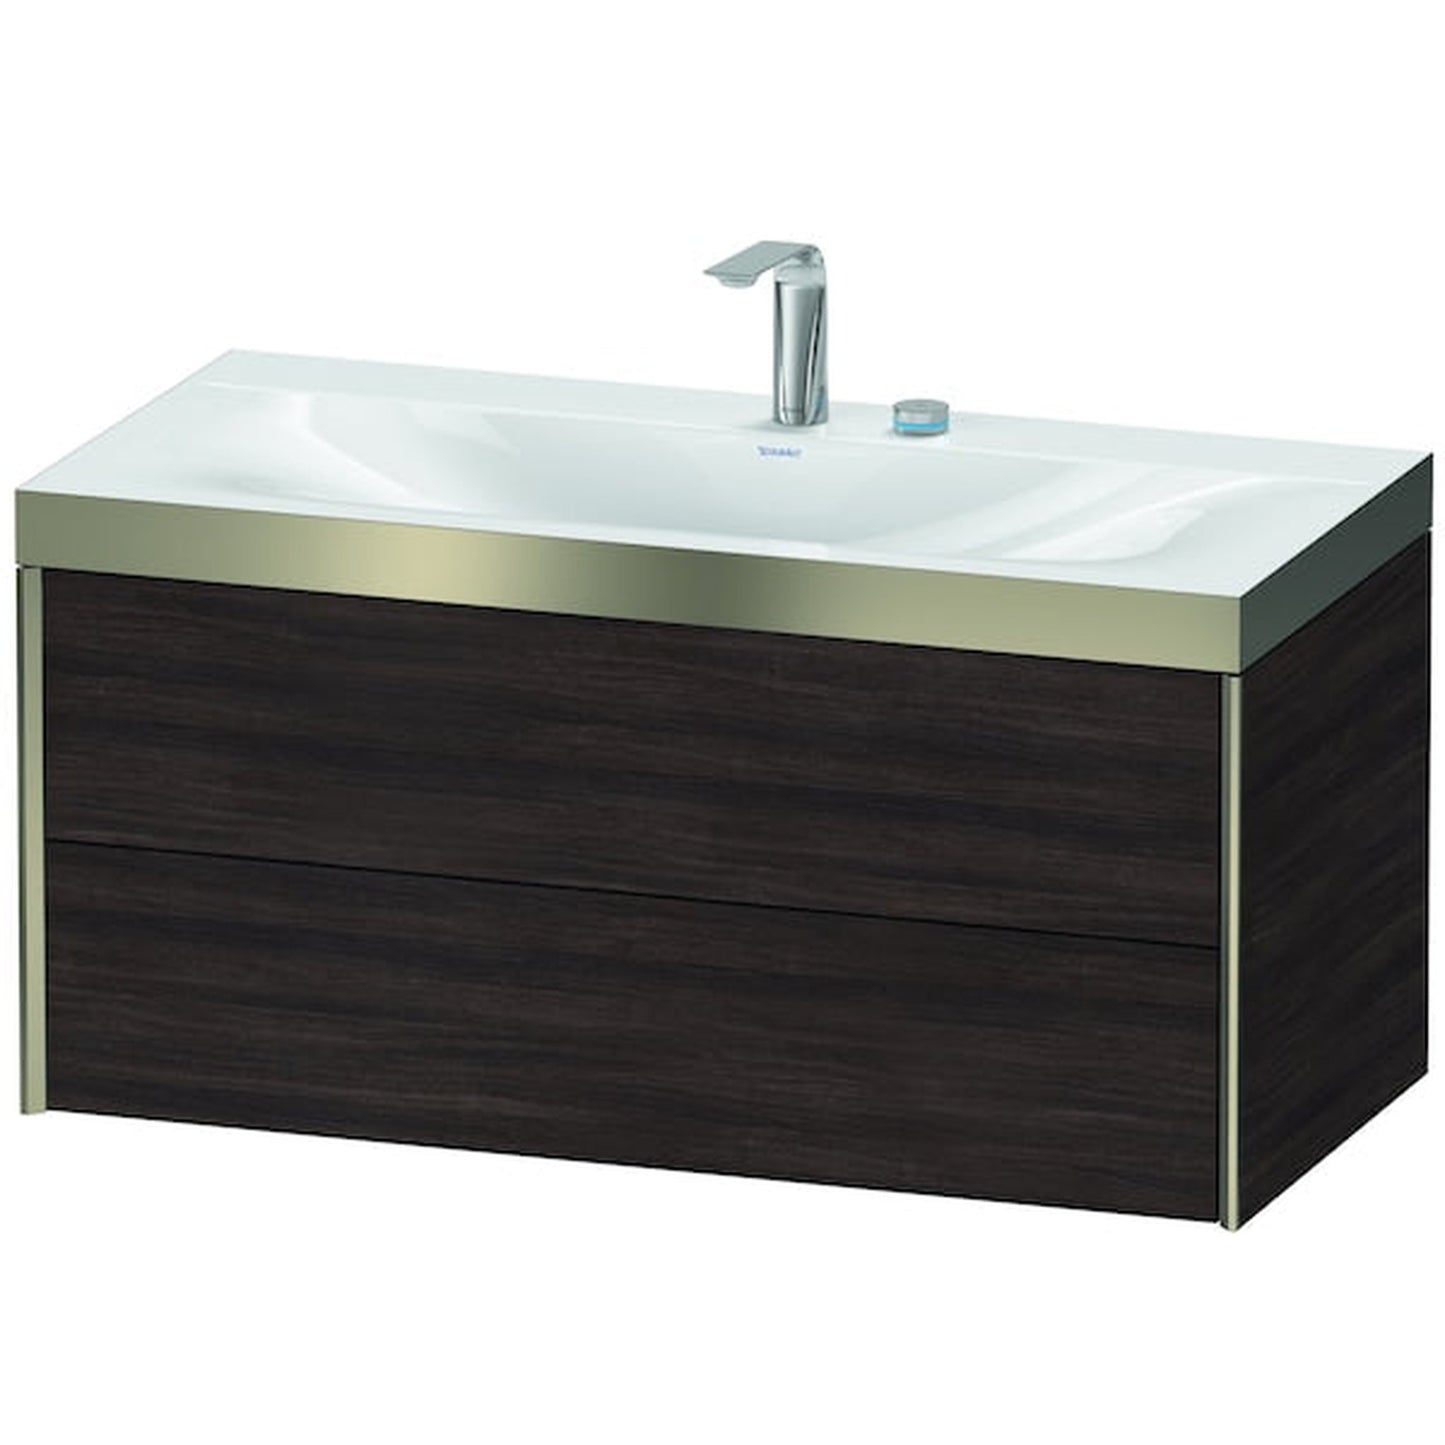 Duravit Xviu 39" x 20" x 19" Two Drawer C-Bonded Wall-Mount Vanity Kit With Two Tap Holes, Chestnut Dark (XV4616EB153P)